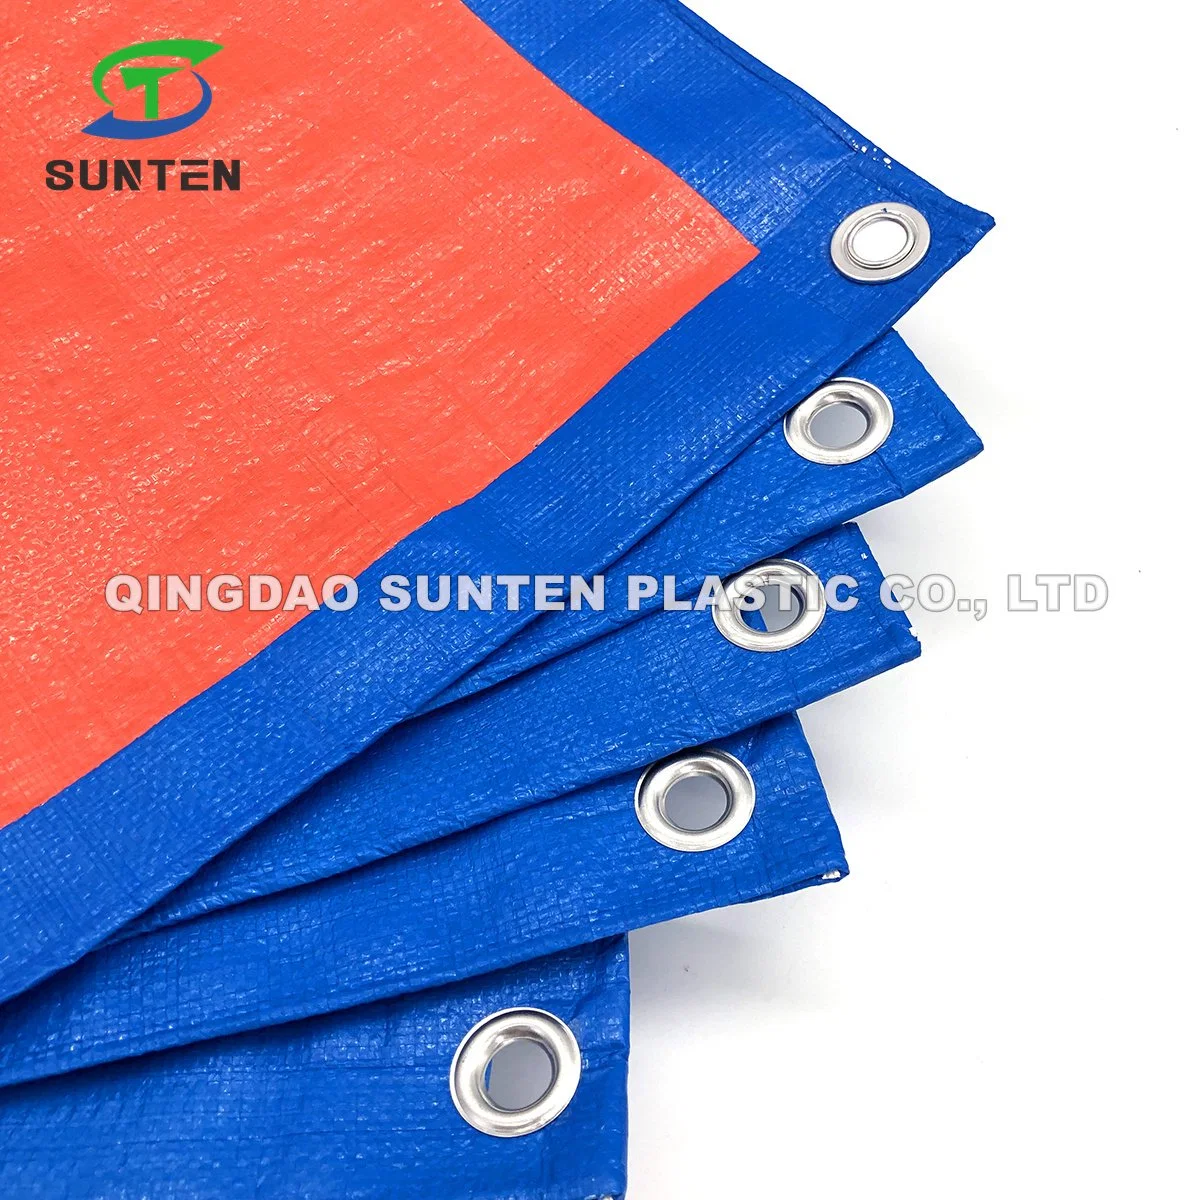 Waterproof/UV Resistant Plastic/PE/HDPE/Polyethylene/Poly Canvas Sheet for Truck, Lorry/Car/ Canopy Cover, Tent, Awnings, Pond/Pool Liner